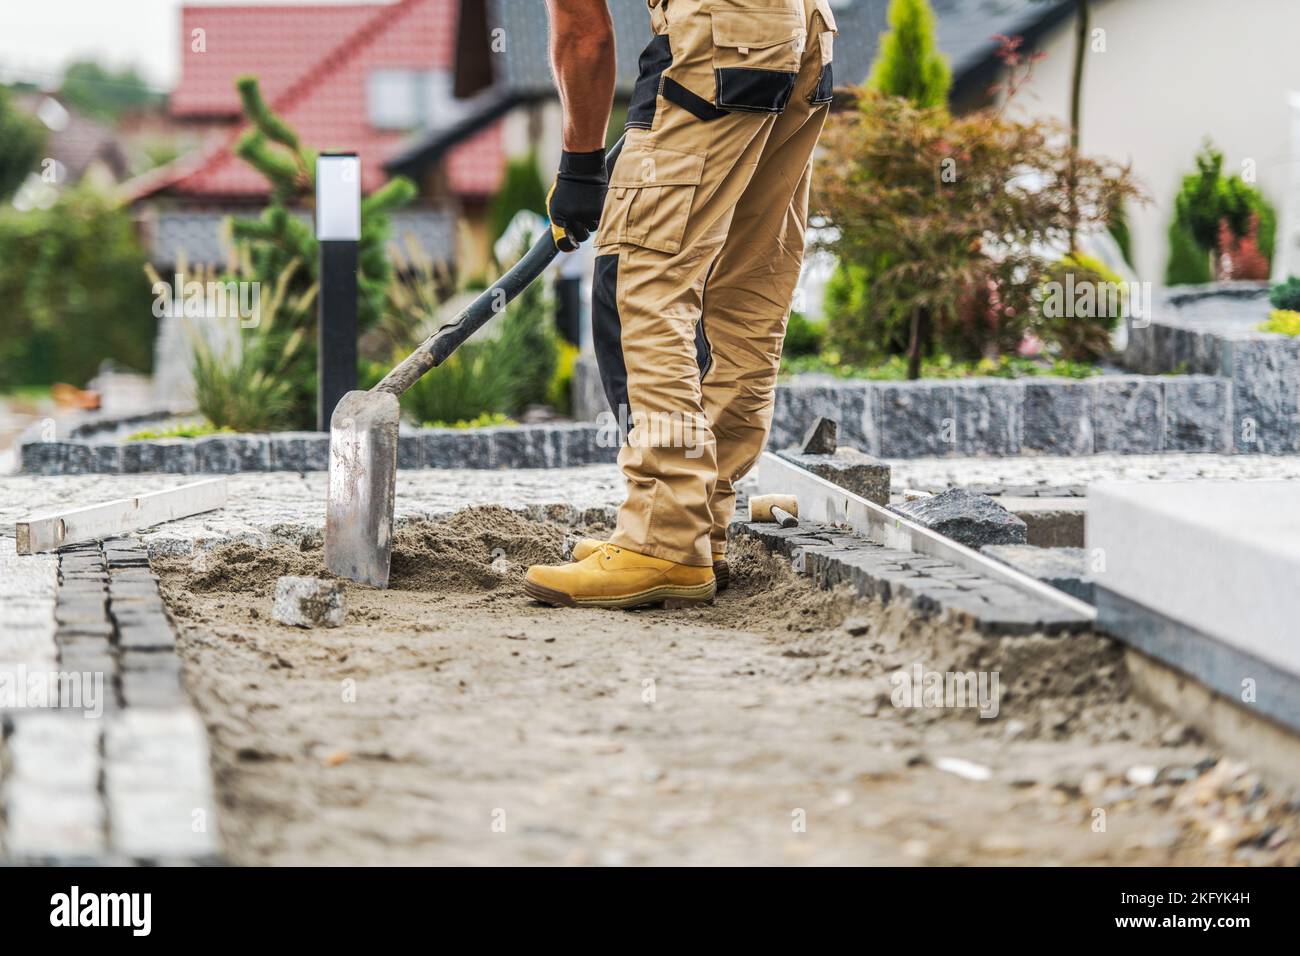 Professional Construction Worker Evenly Spreading Sand with a Shovel Before Laying Paving Bricks. Garden Walkway Building Process. Stock Photo